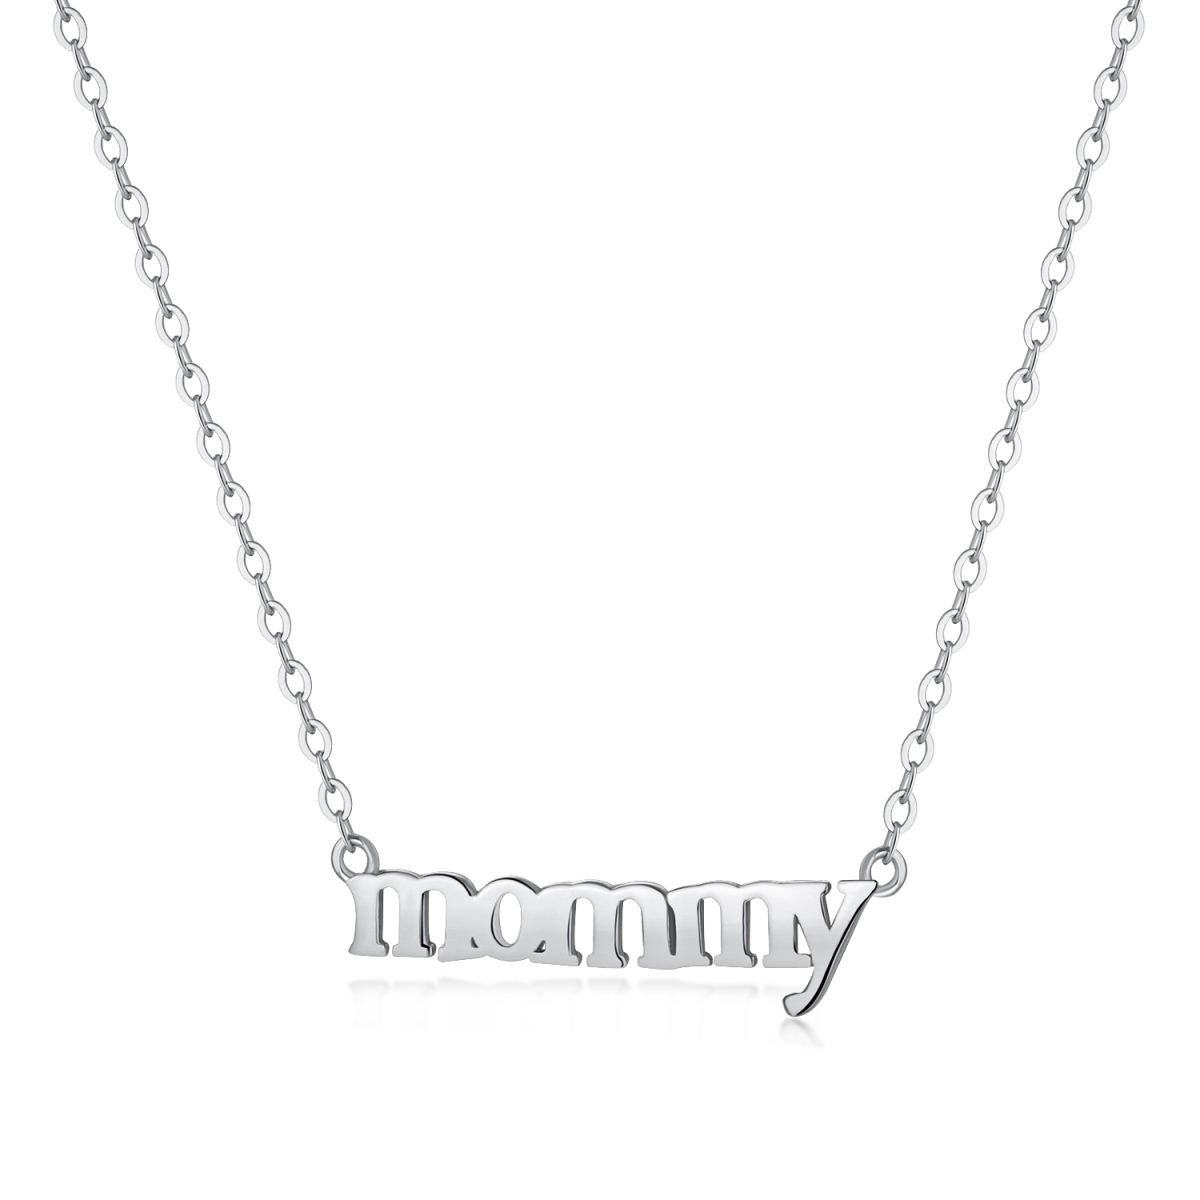 My Great Mommy Sterling Silver Necklace｜Best Mother's Day Gift